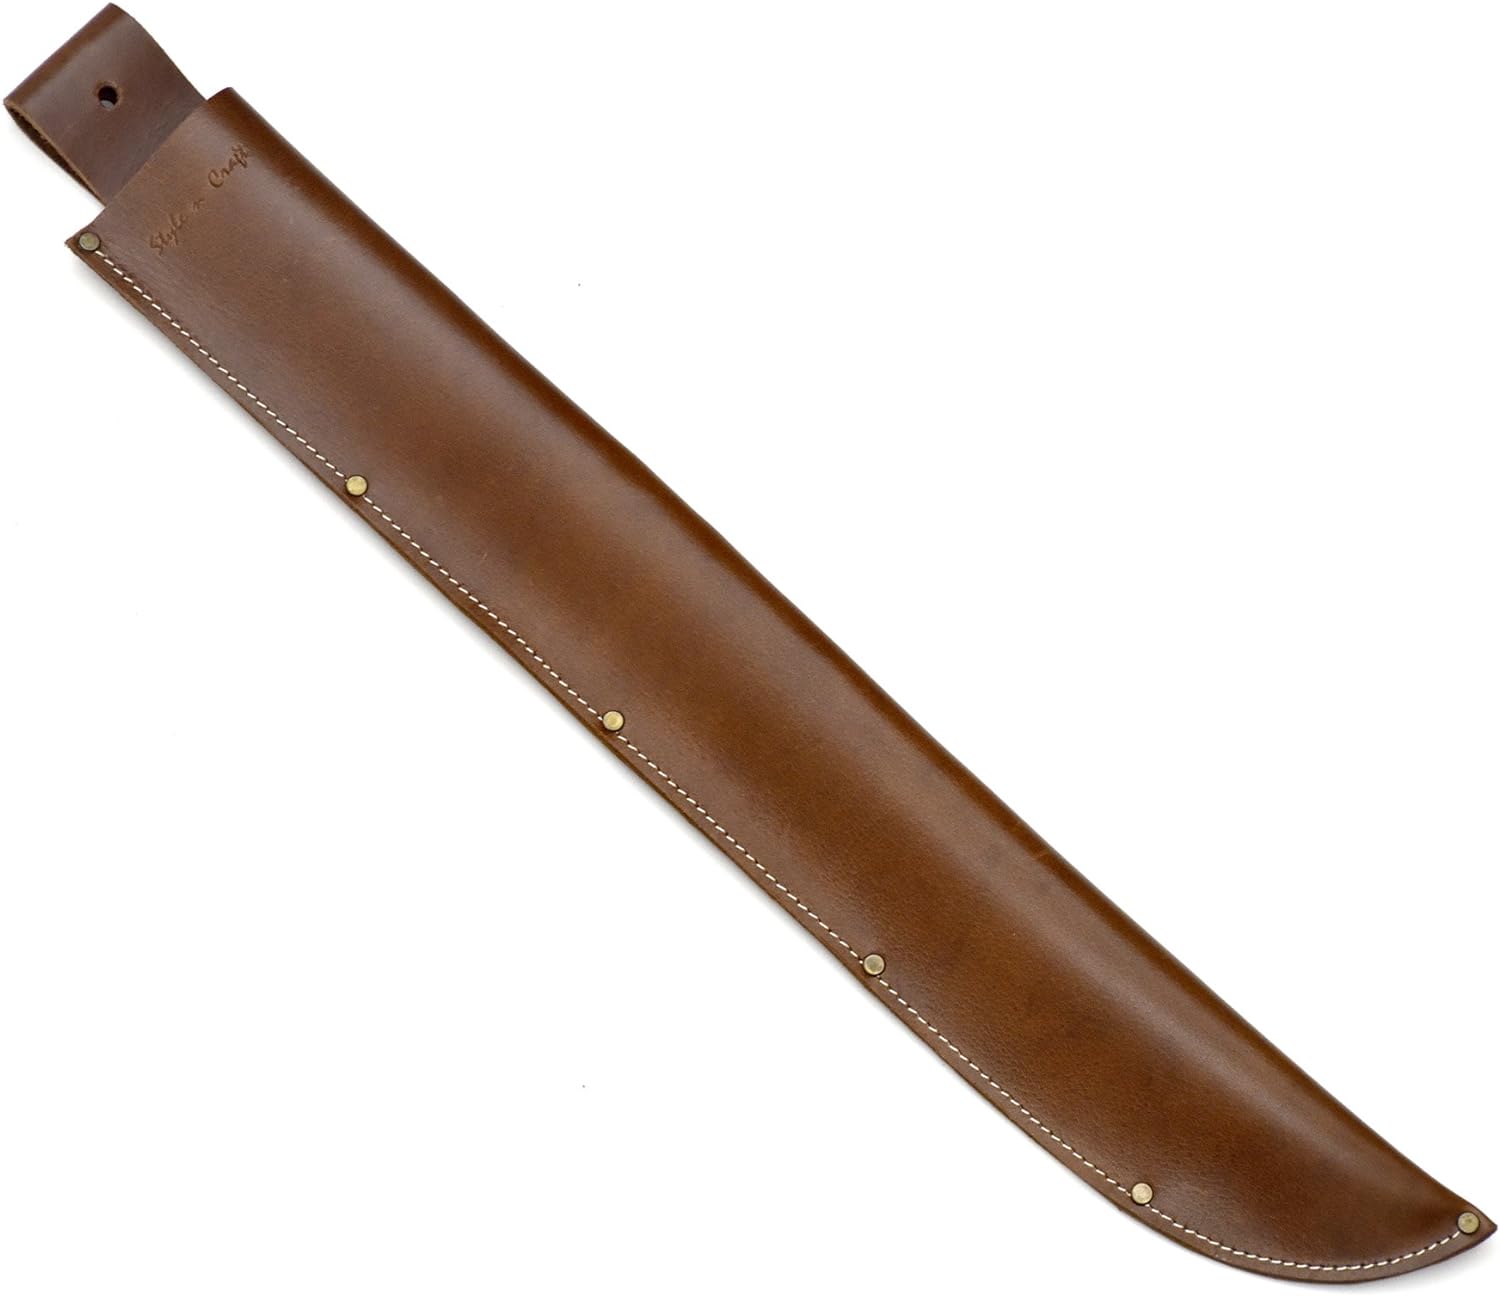 Style-n-Craft Leathers Style n Craft 98028 Machete Sheath - for up to A 22" Length Blade, Dark Tan